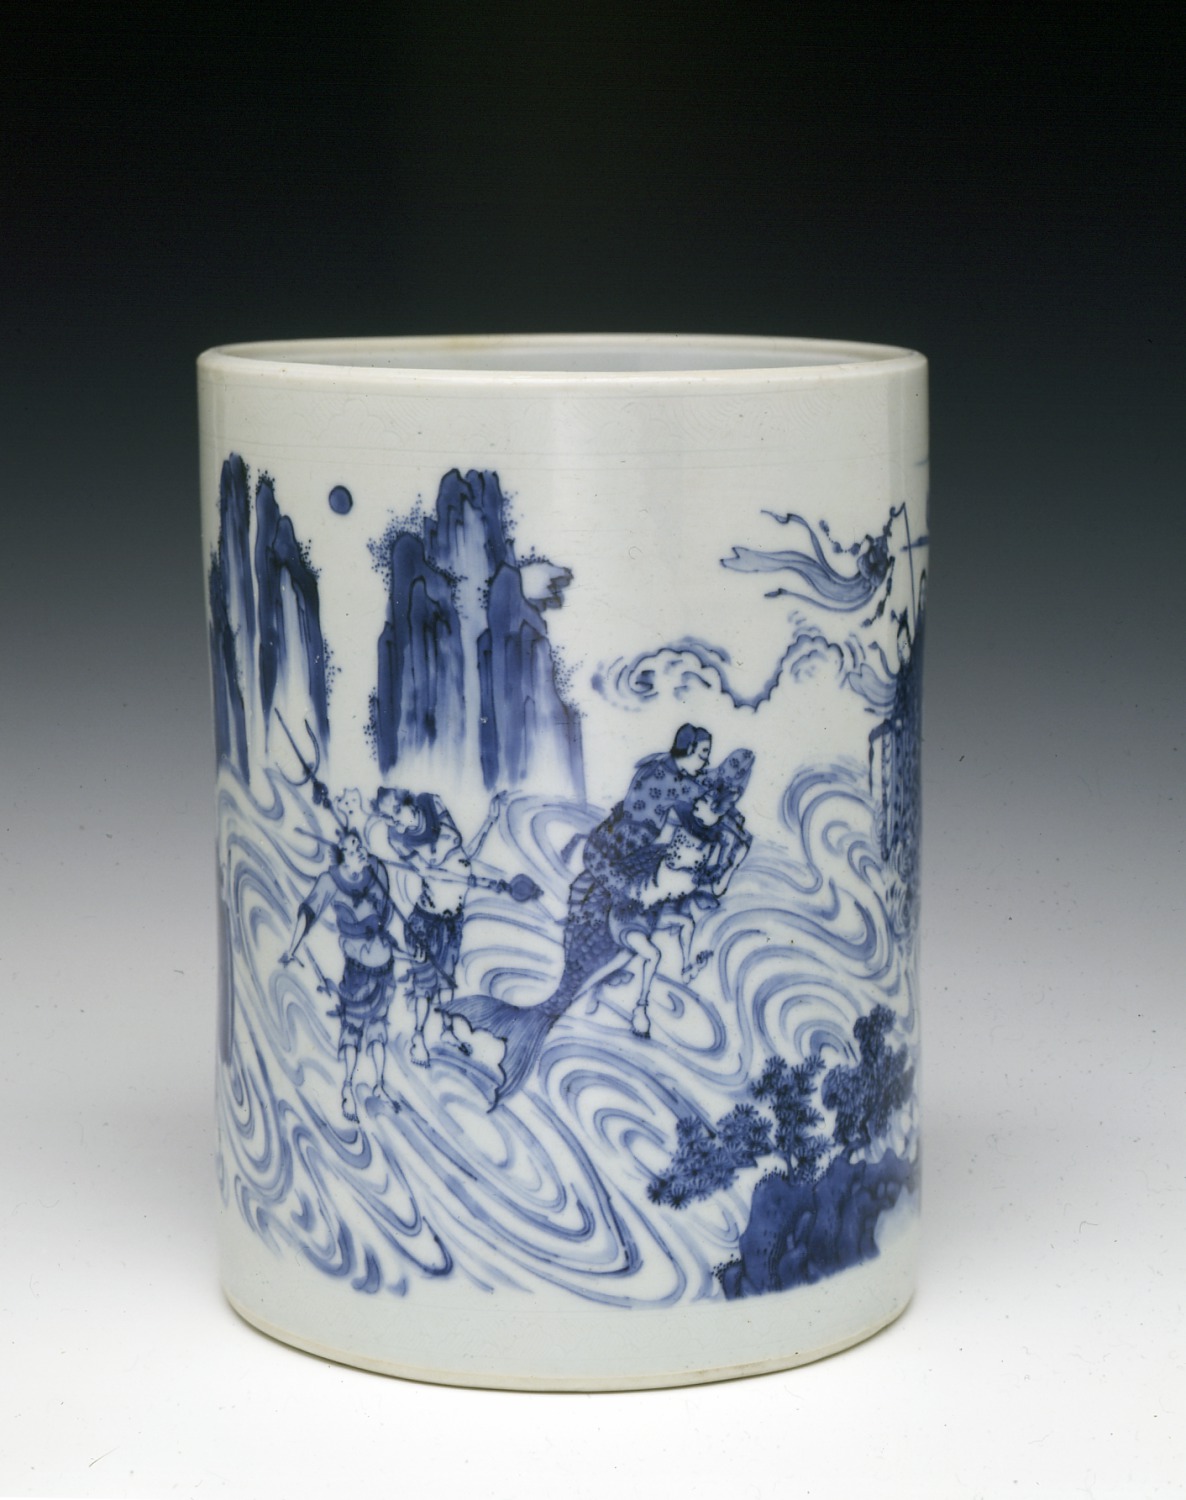 Unknown, Brushpot with narrative scene, 1625-1650. Porcelain with blue underglazing. Gift of Dr. and Mrs. Matthew L. Wong.